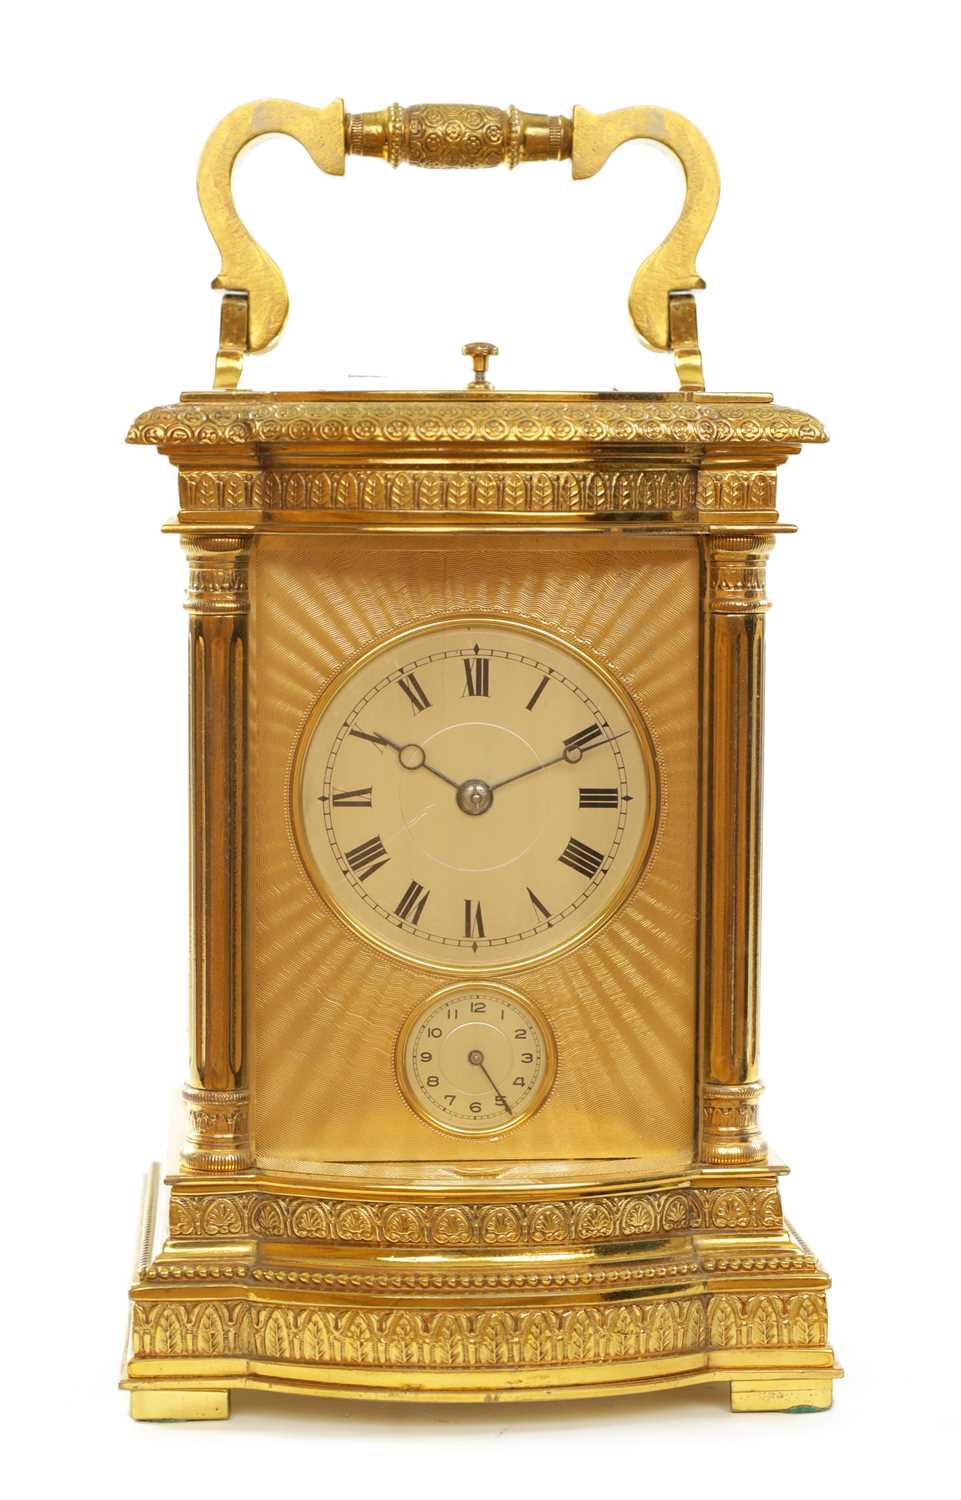 Lot 10 - A LATE 19TH CENTURY FRENCH LACQUERED BRASS GRANDE SONNERIE CARRIAGE CLOCK REPEATER OF LARGE SIZE